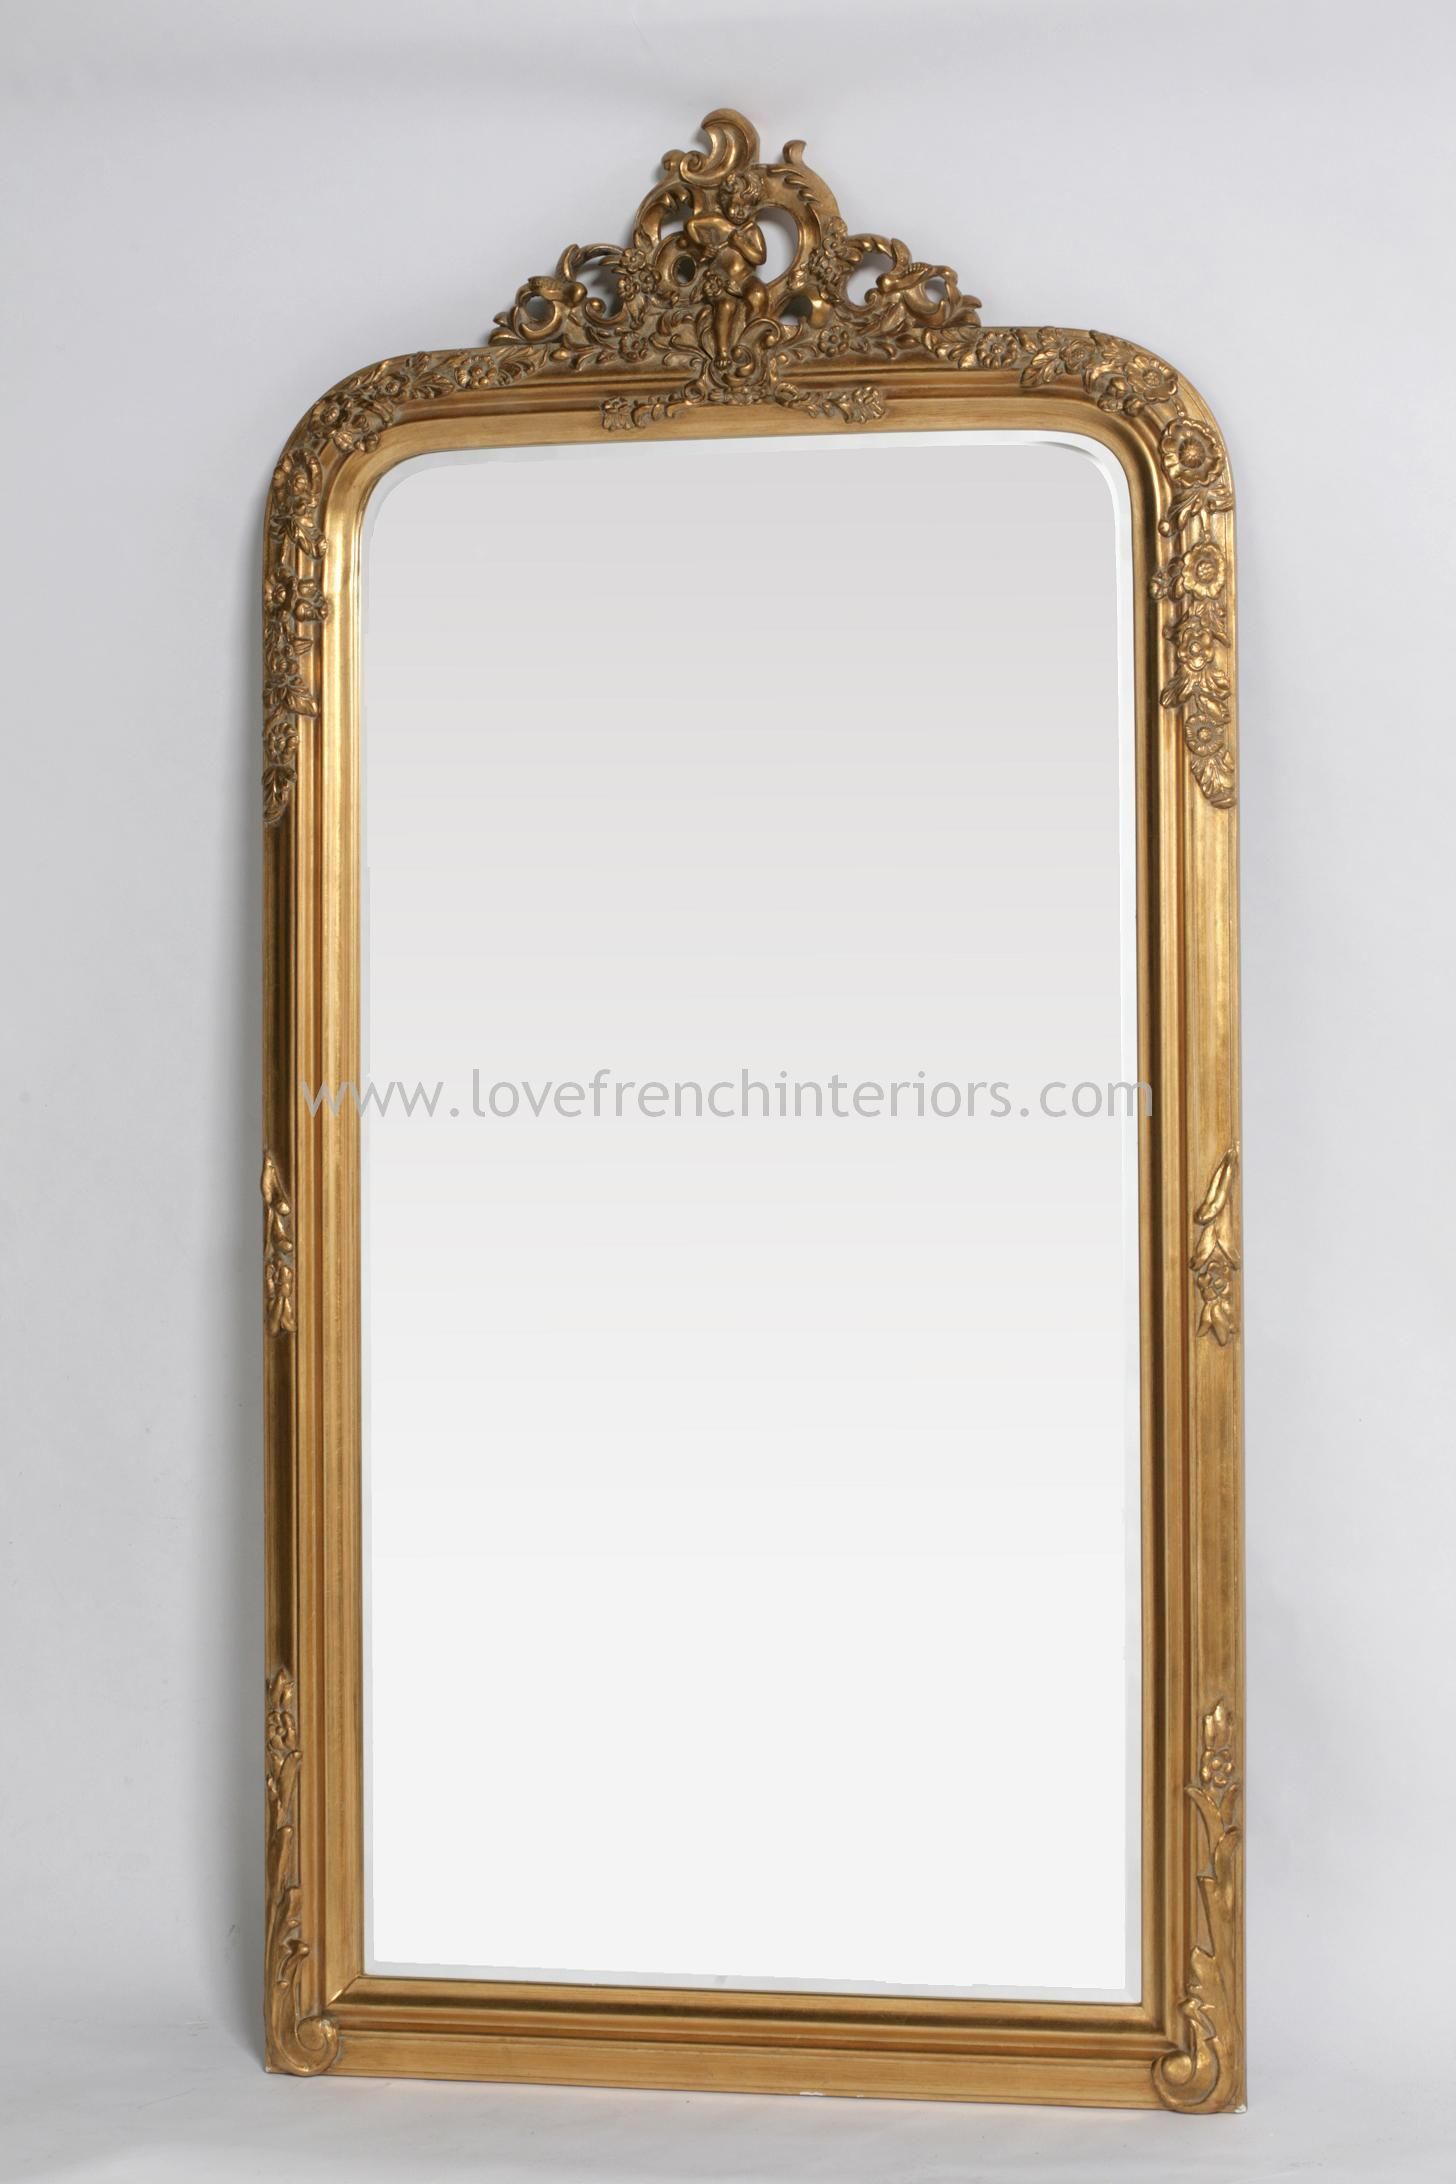 Antique Gold Floor Standing Mirror With Crest Within Antiqued Bronze Floor Mirrors (View 5 of 15)